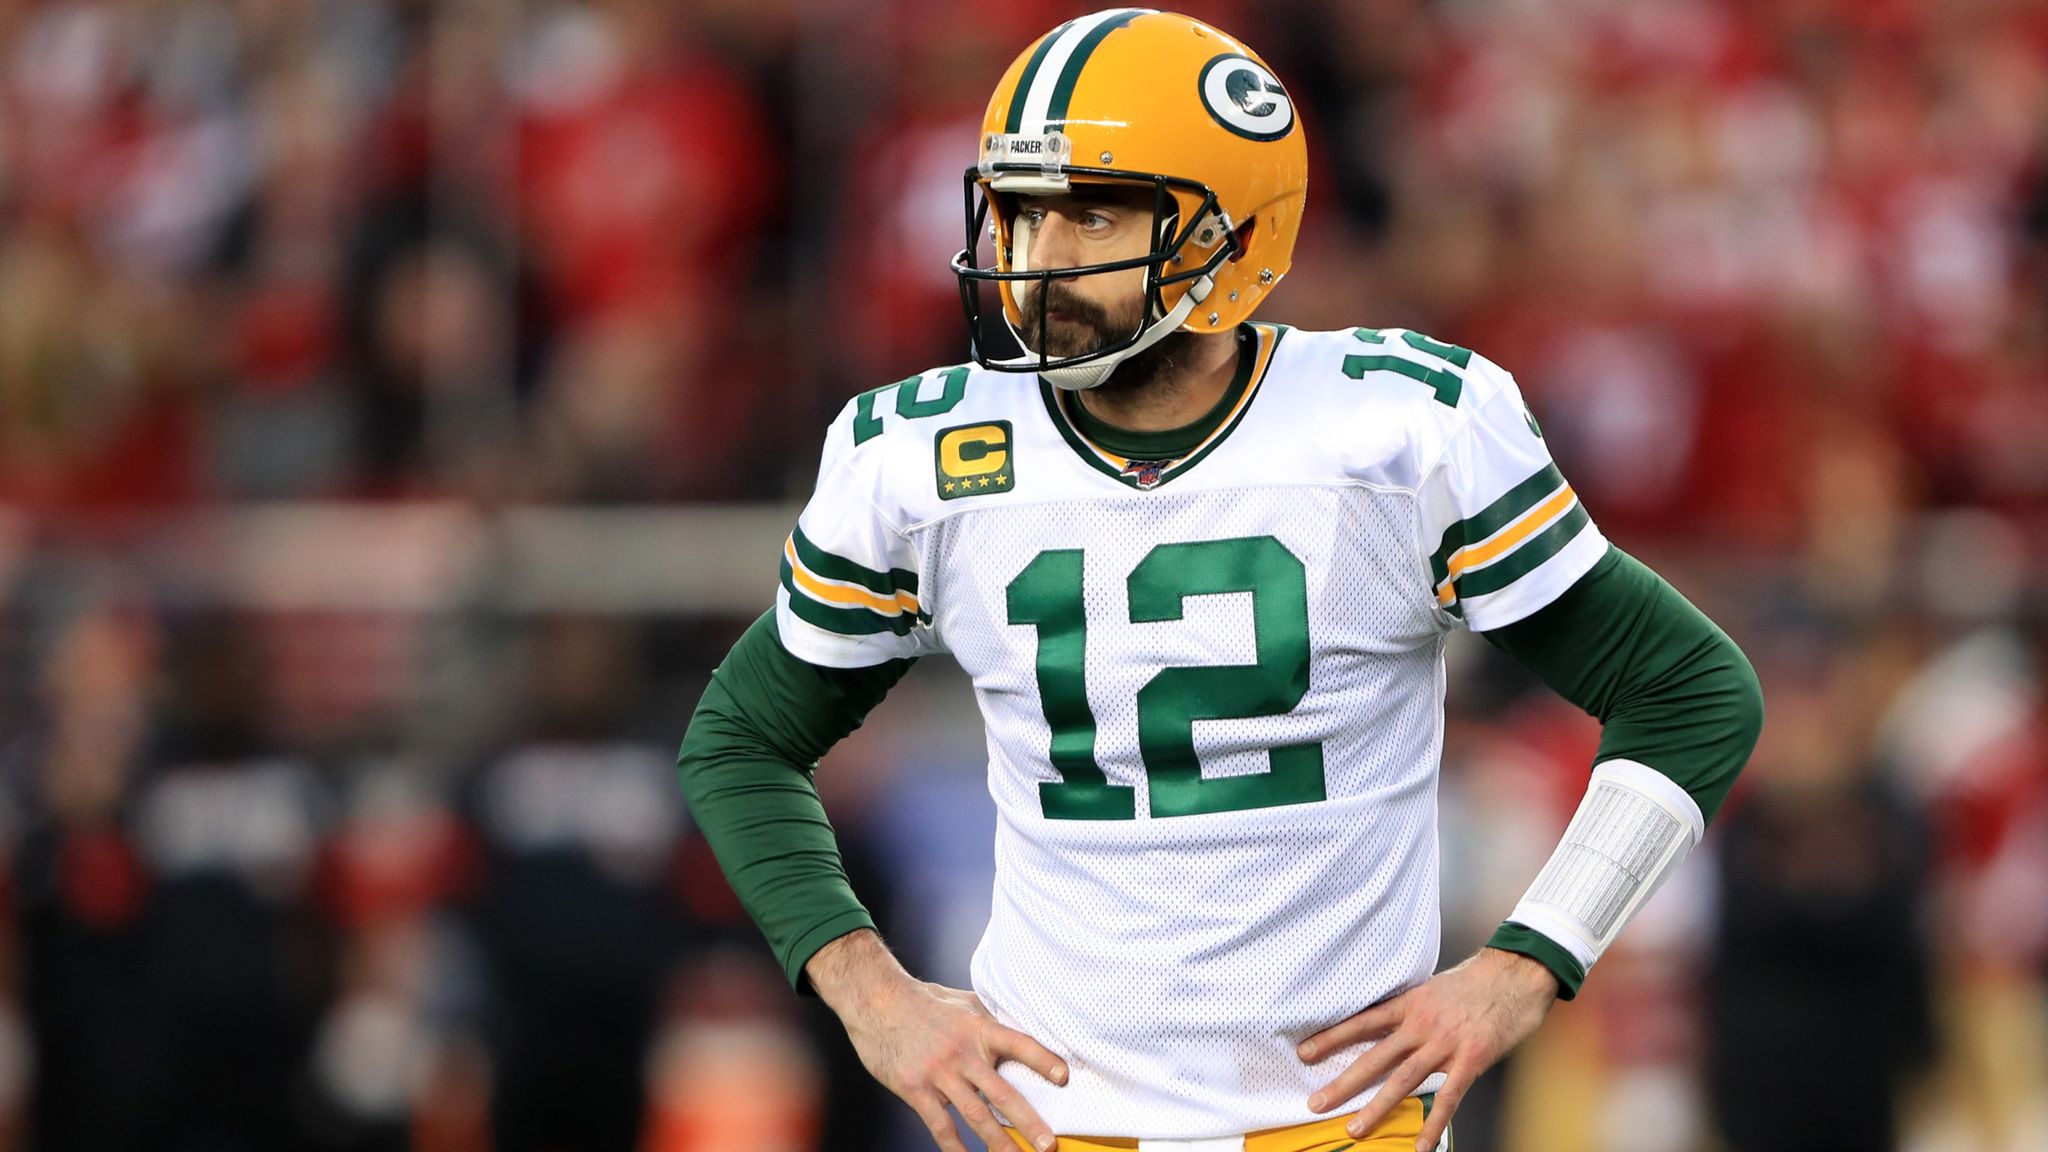 NFC championship game: Green Bay Packers 20-37 San Francisco 49ers